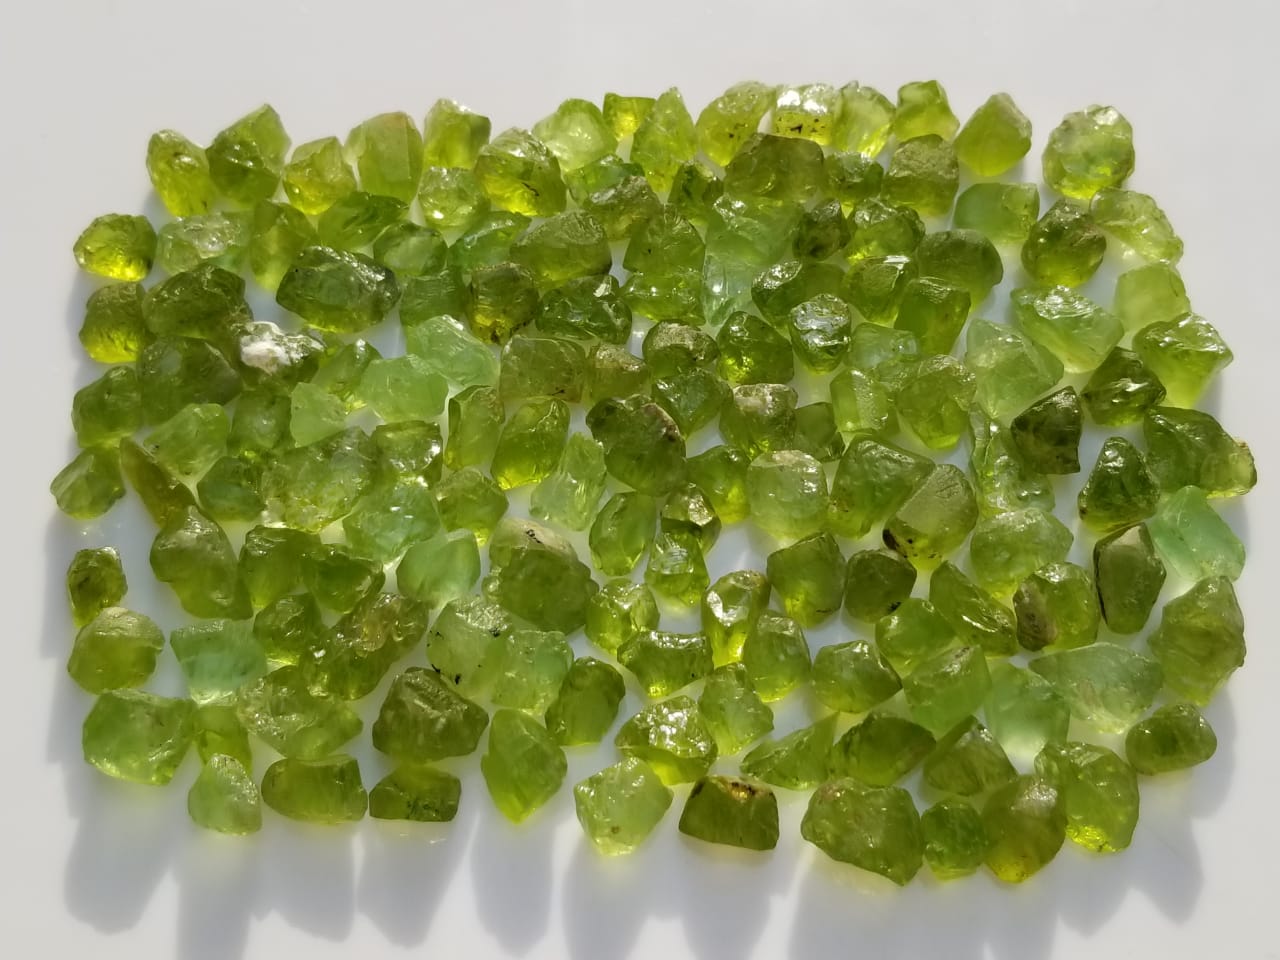 Peridot Facet Rough Peridot available, have good clarity and color